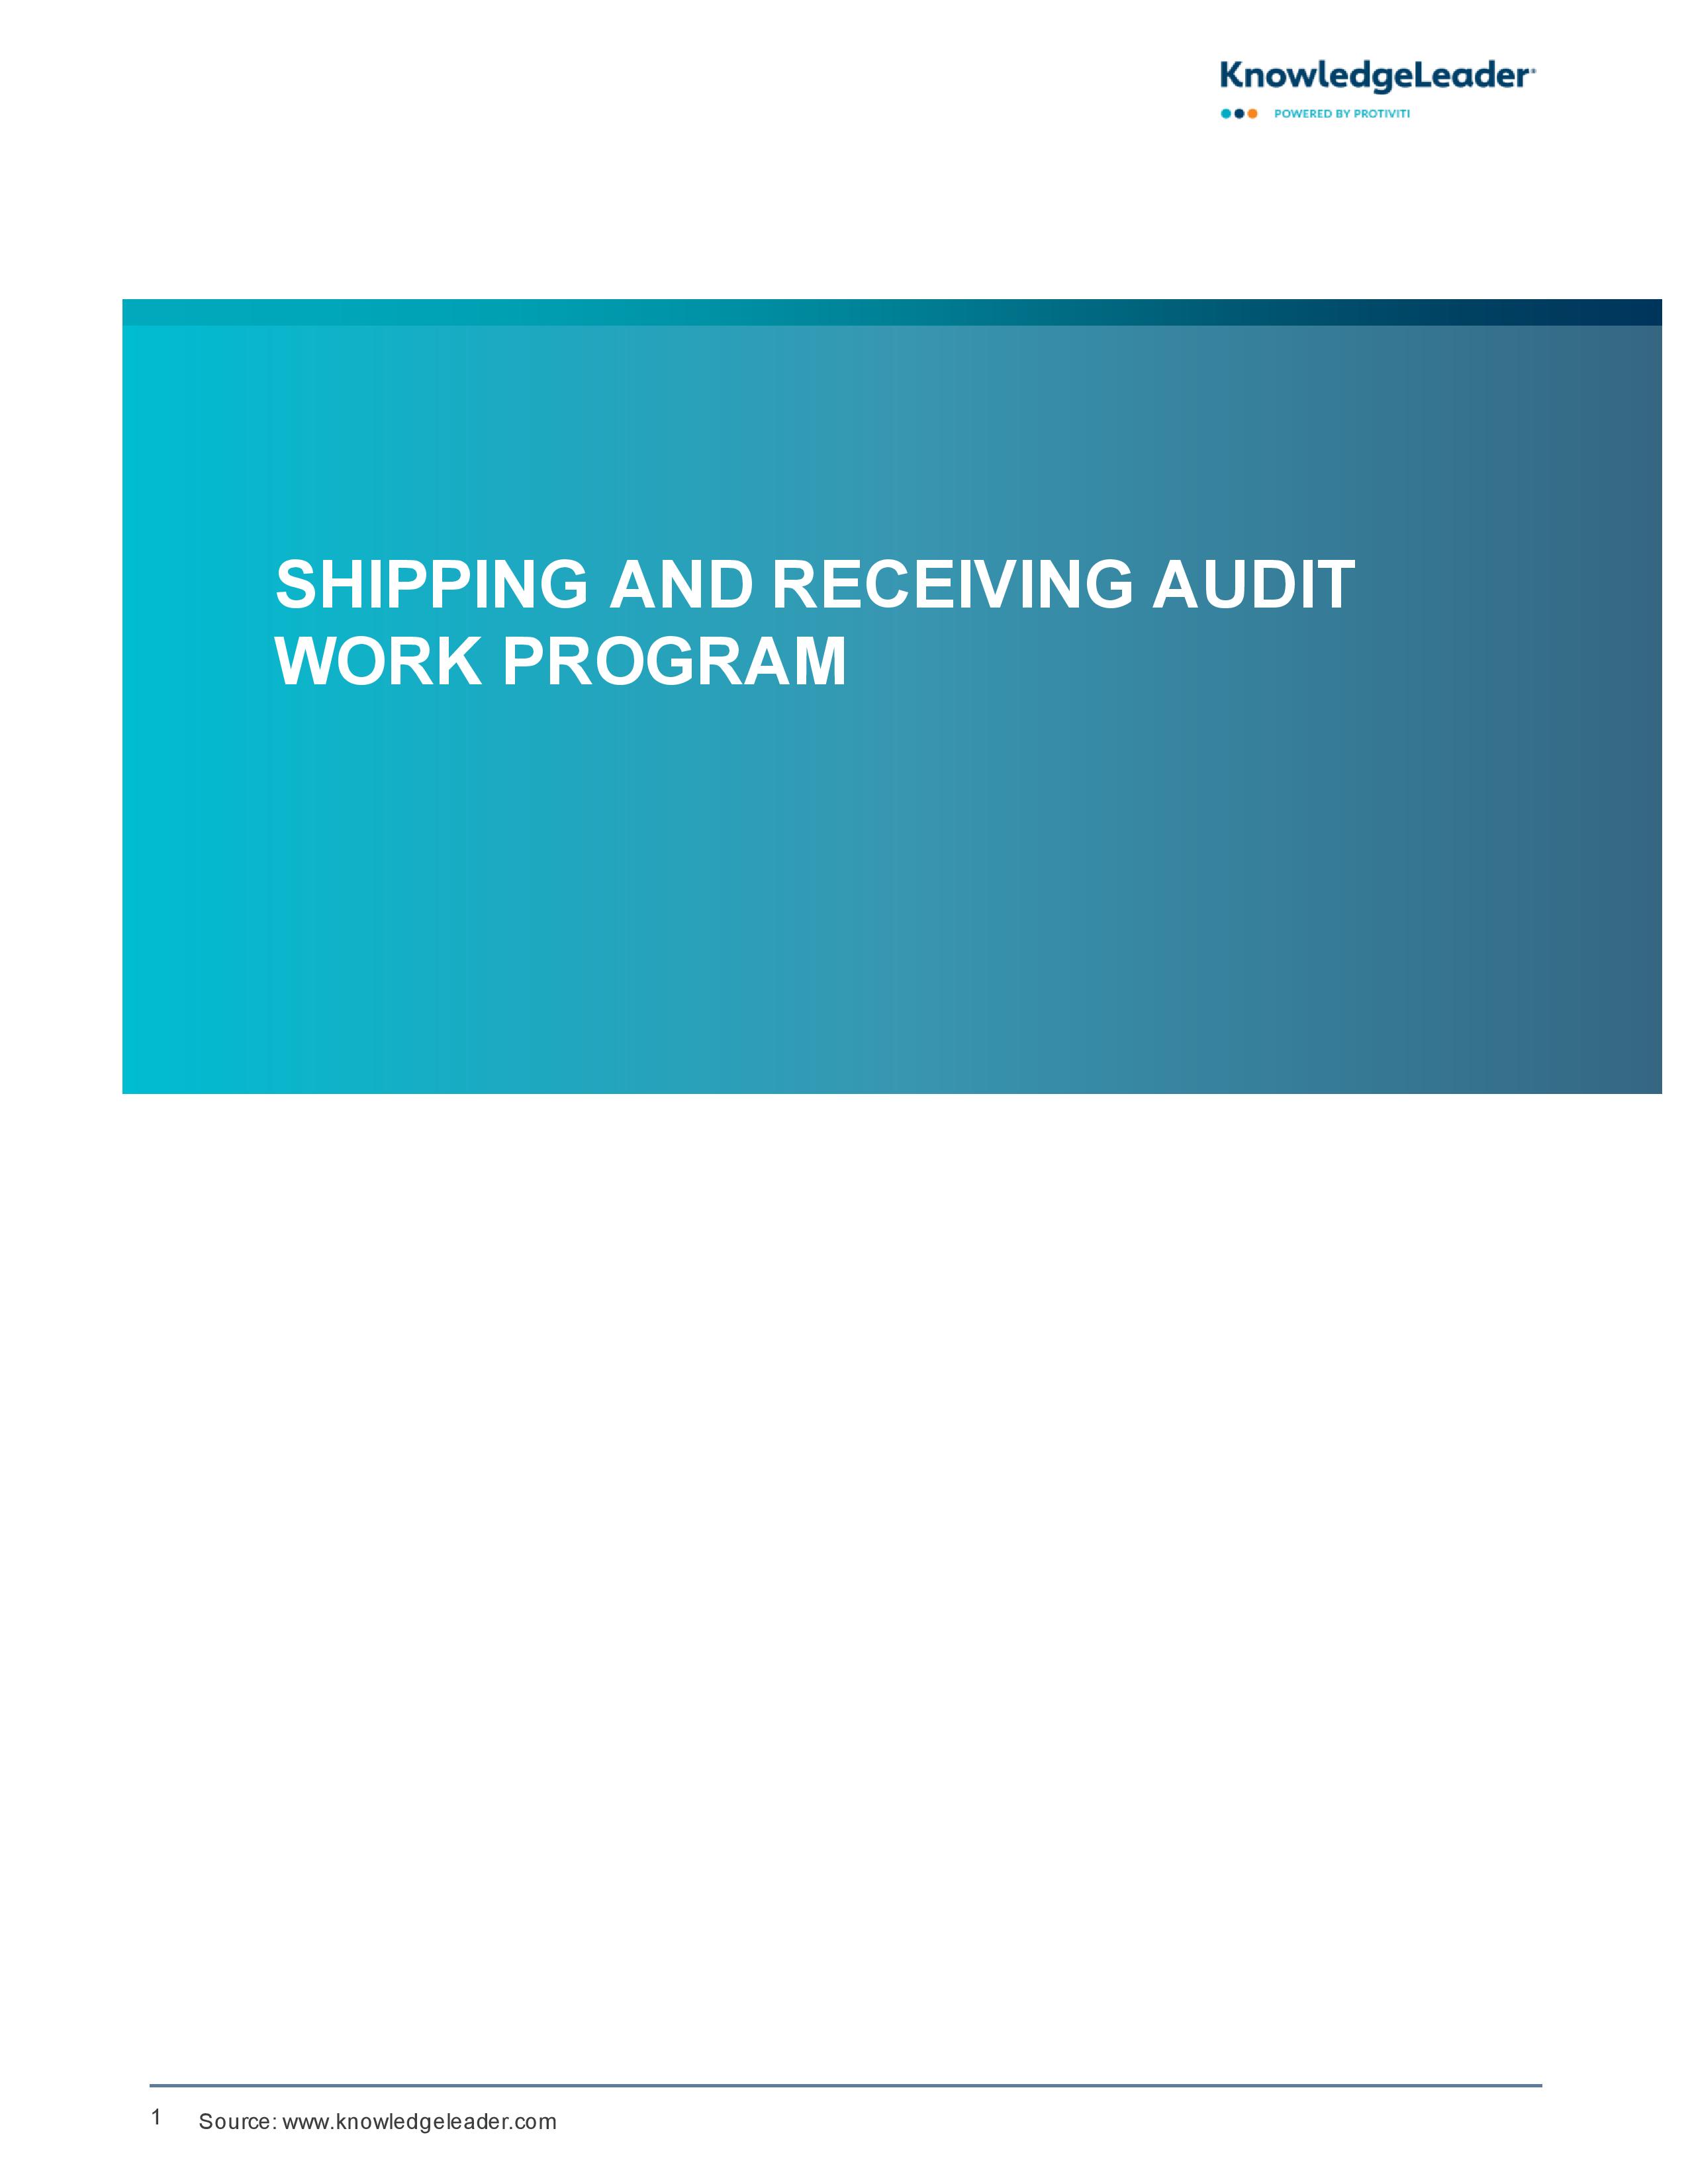 Screenshot of the first page of Shipping and Receiving Audit Work Program